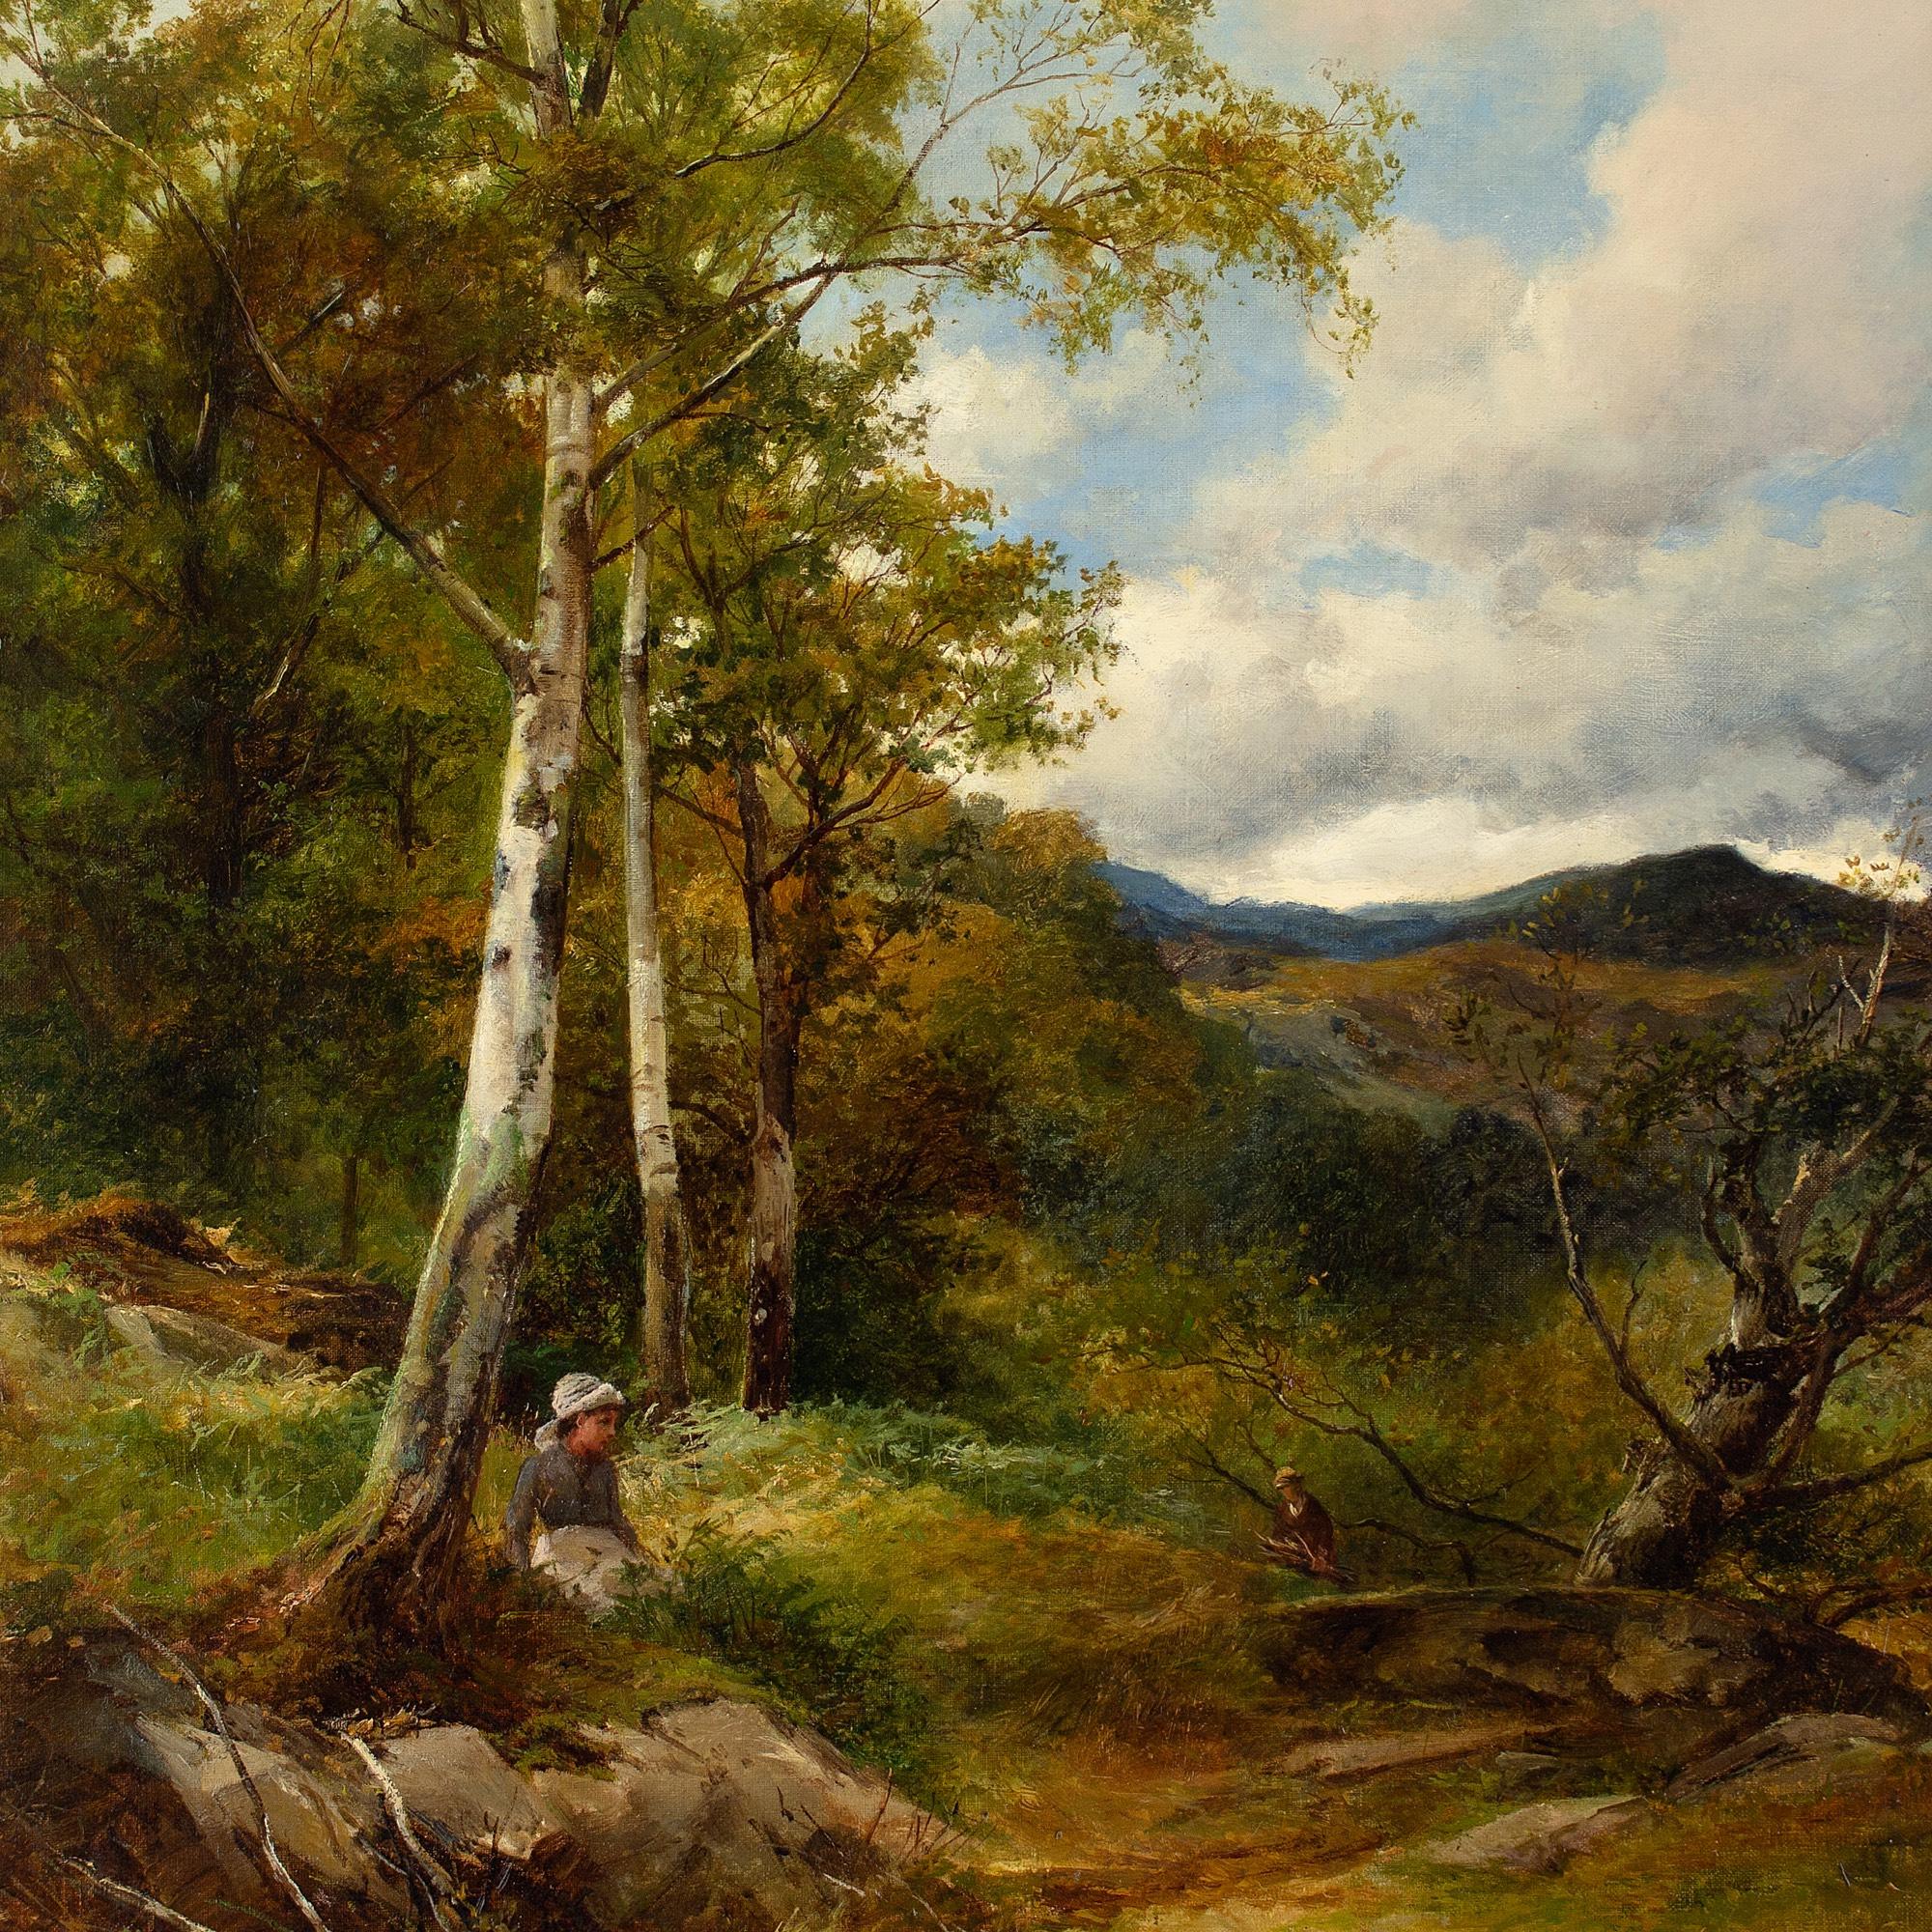 This late 19th-century oil painting by British artist David Bates (1840-1921) depicts a woodland landscape in North Wales.

A young girl sits to rest under the sinuous bough of a leaning birch amid the golden tones of autumnal foliage. An older